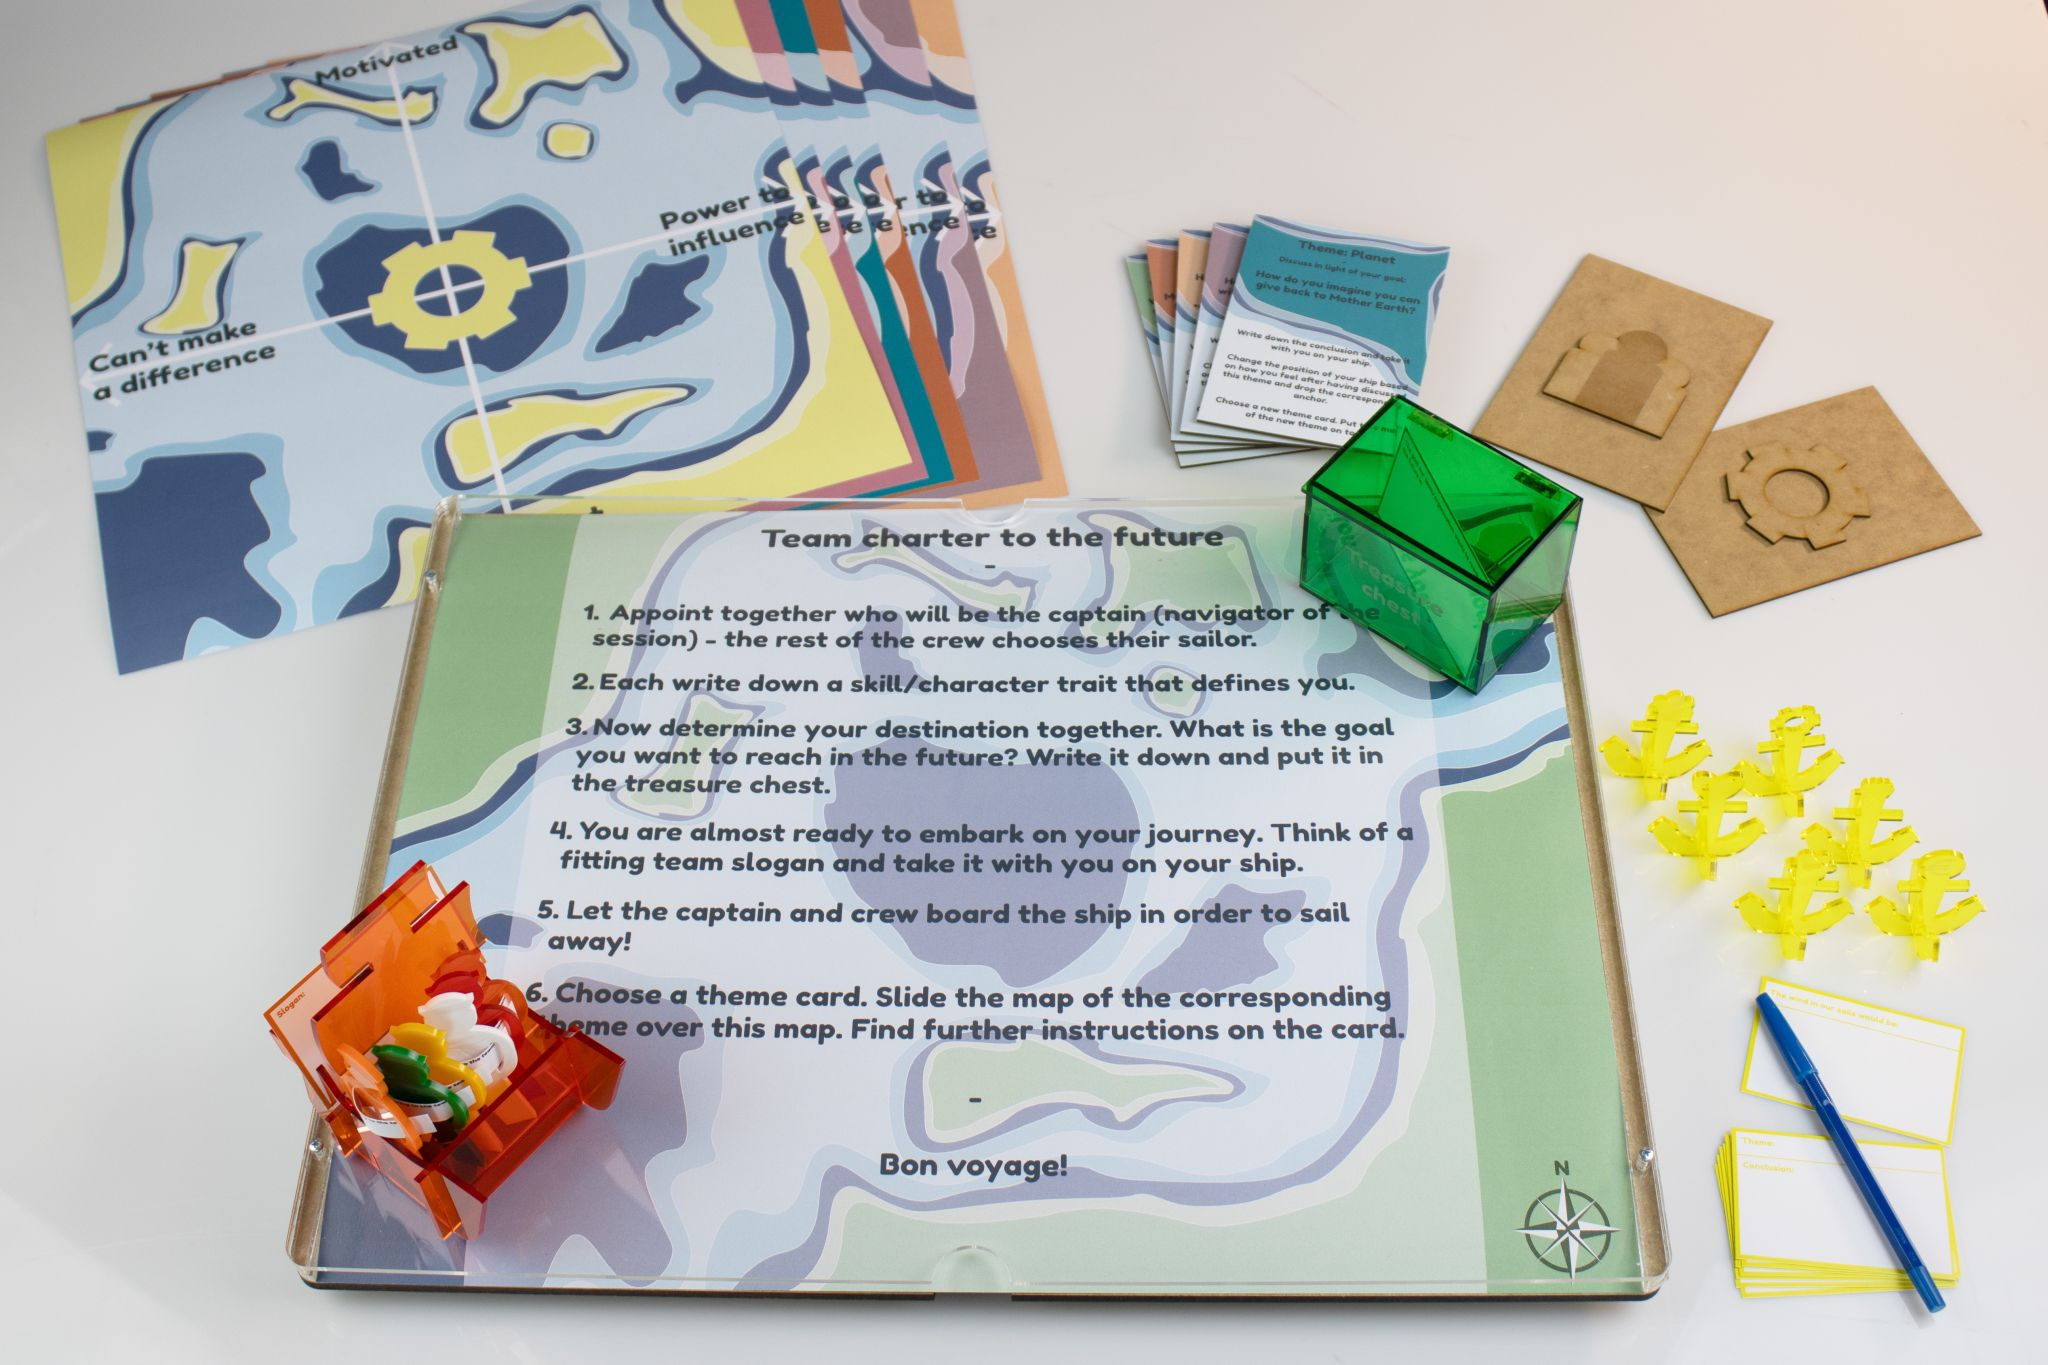 A photo of the Creative Futuring for Organizations game.